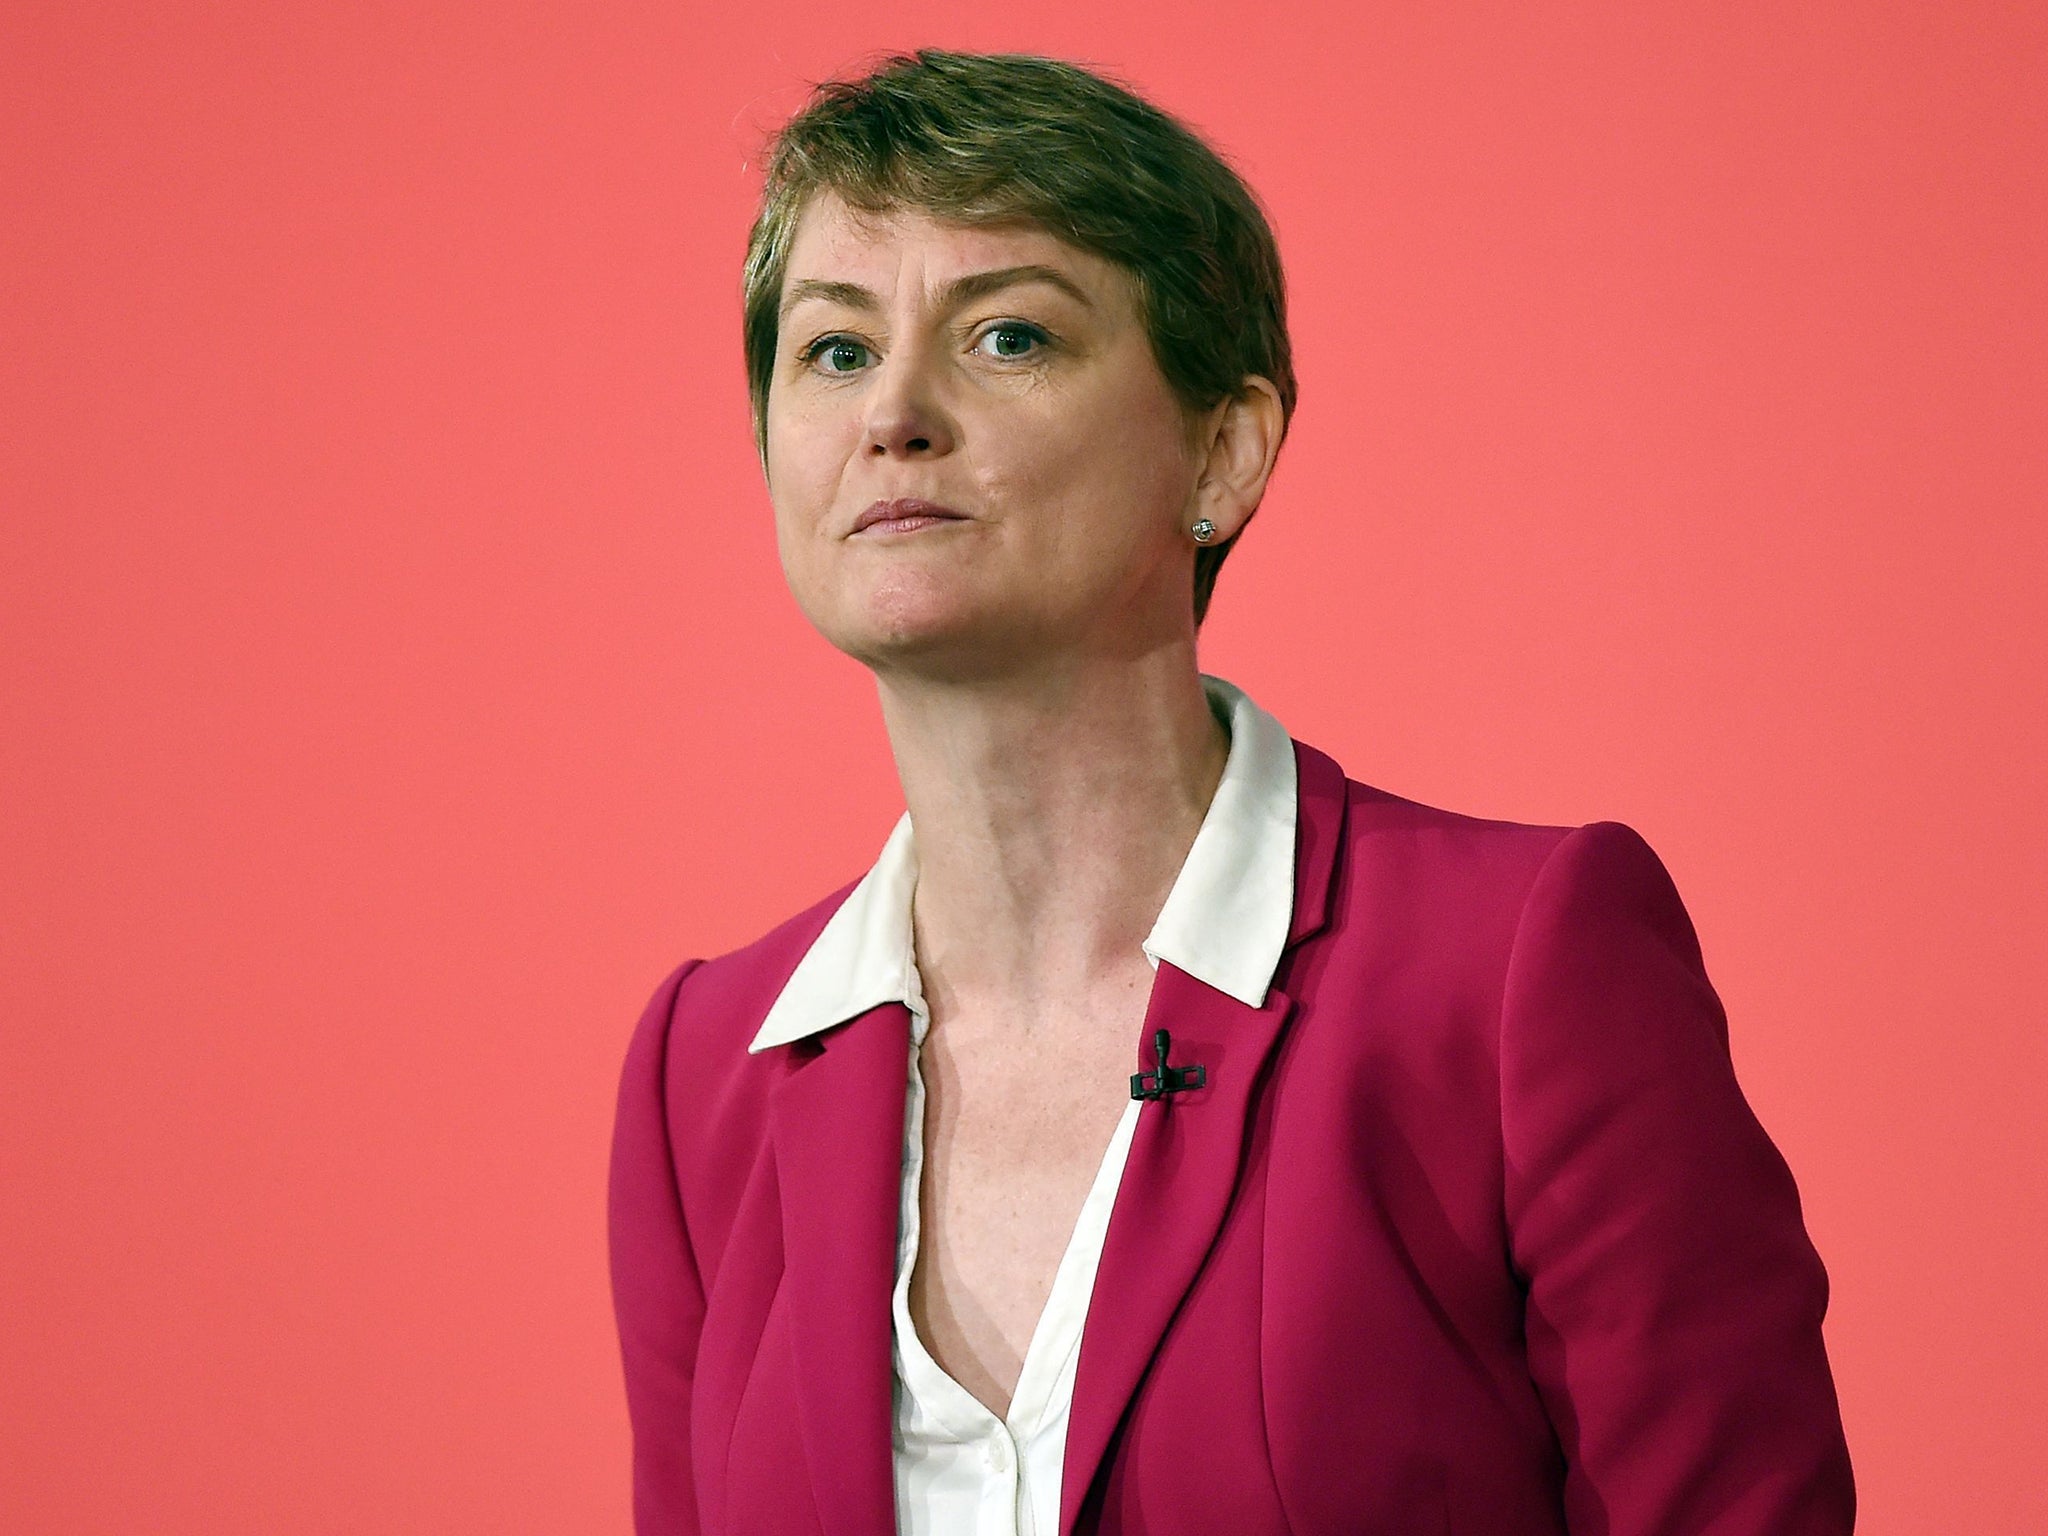 A row has broken out on Twitter after an image was shared which appeared to show Yvette Cooper in a first class train carriage